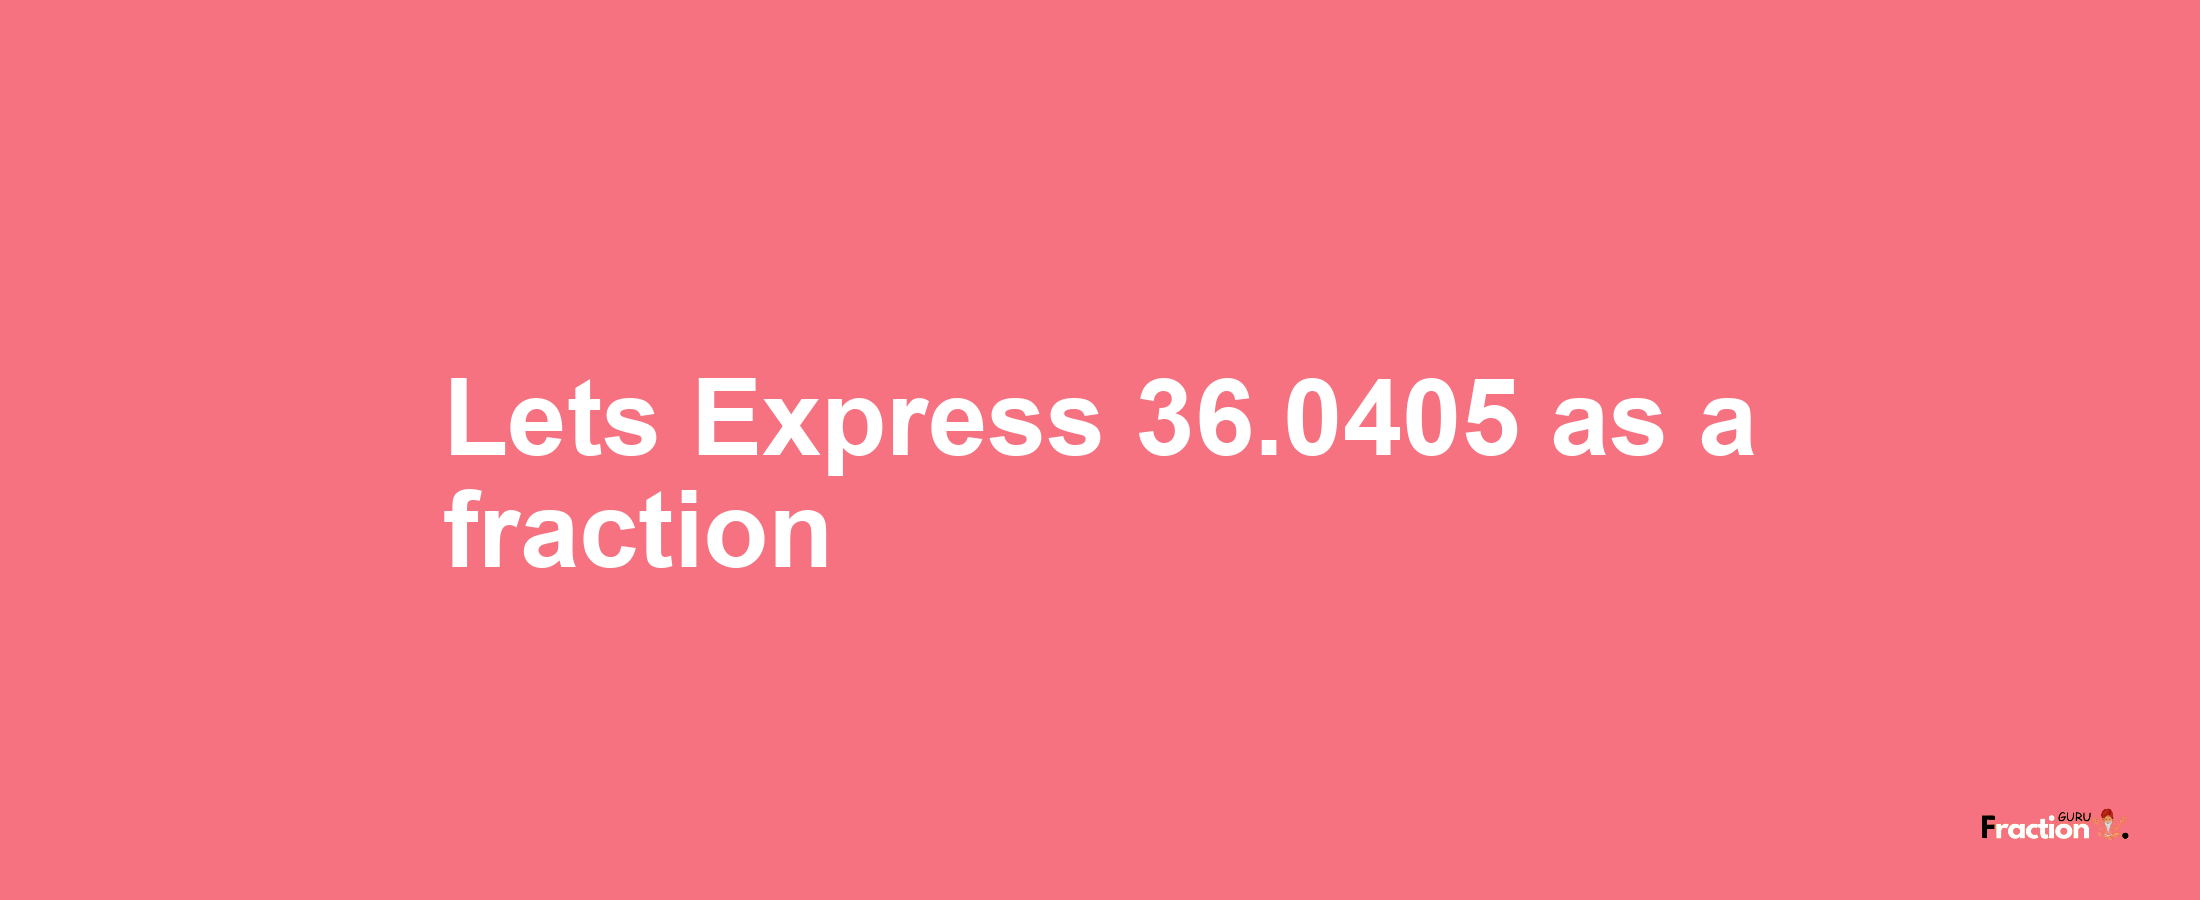 Lets Express 36.0405 as afraction